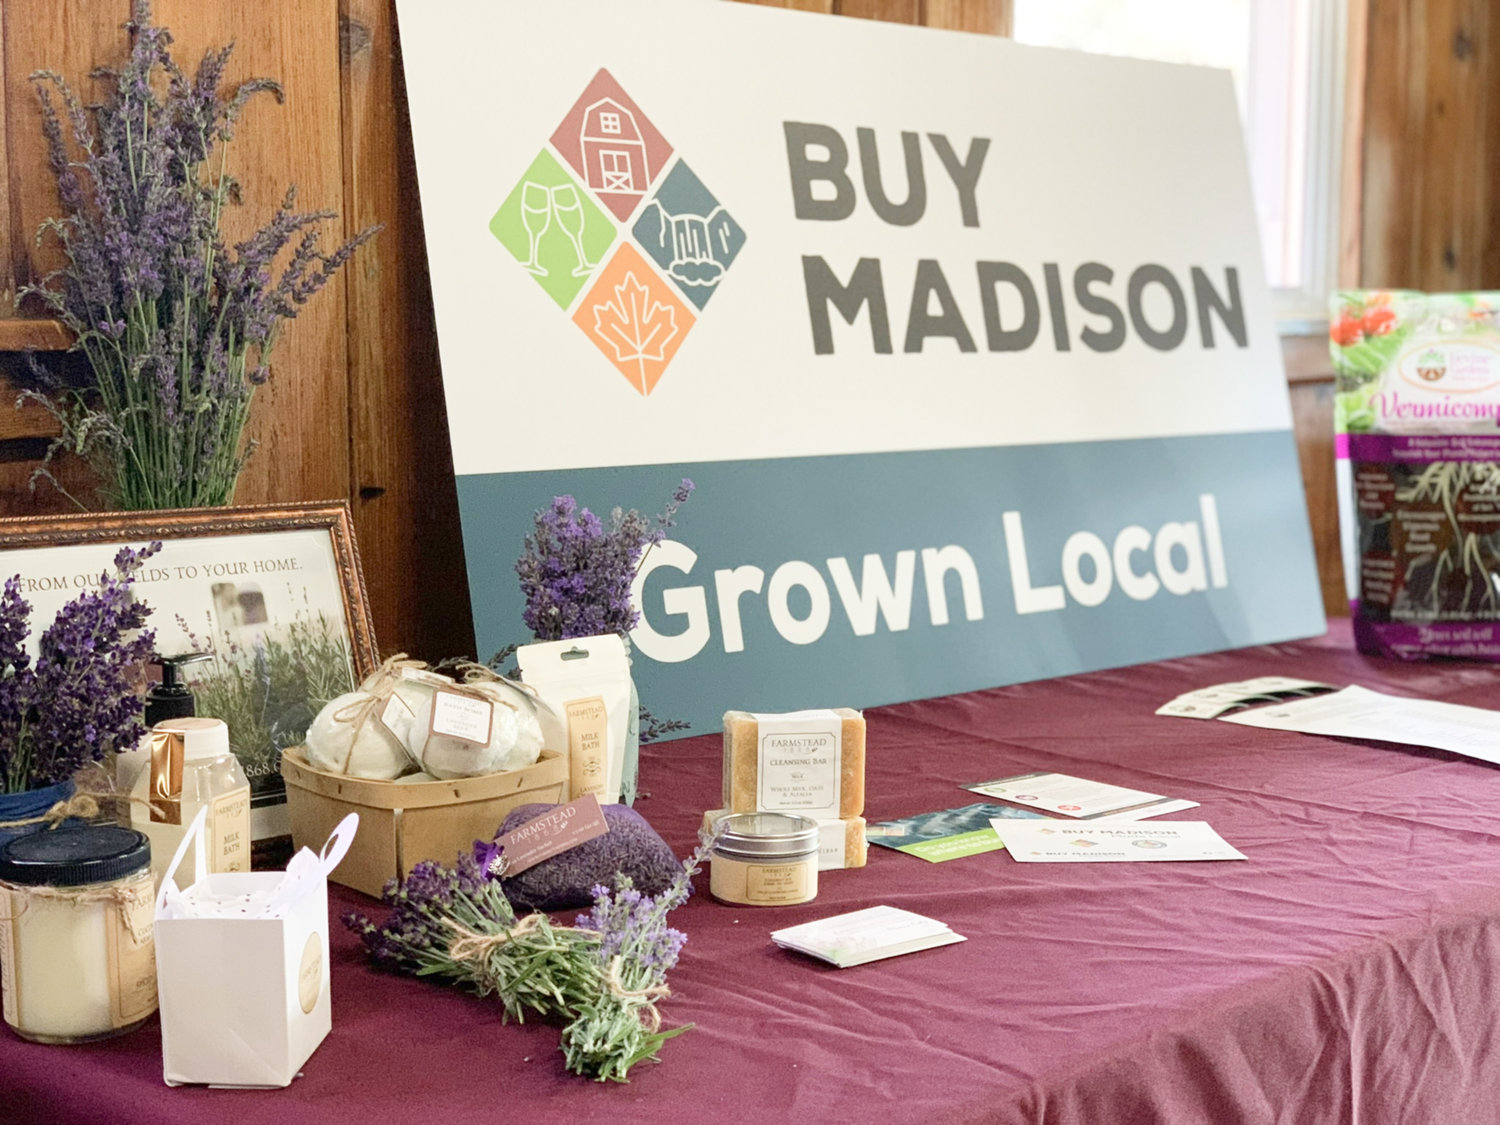 Those who wondered where the milk they drank every day comes from or where they can get local produce can find it now with the click of a button with Buy Madison County’s new website.